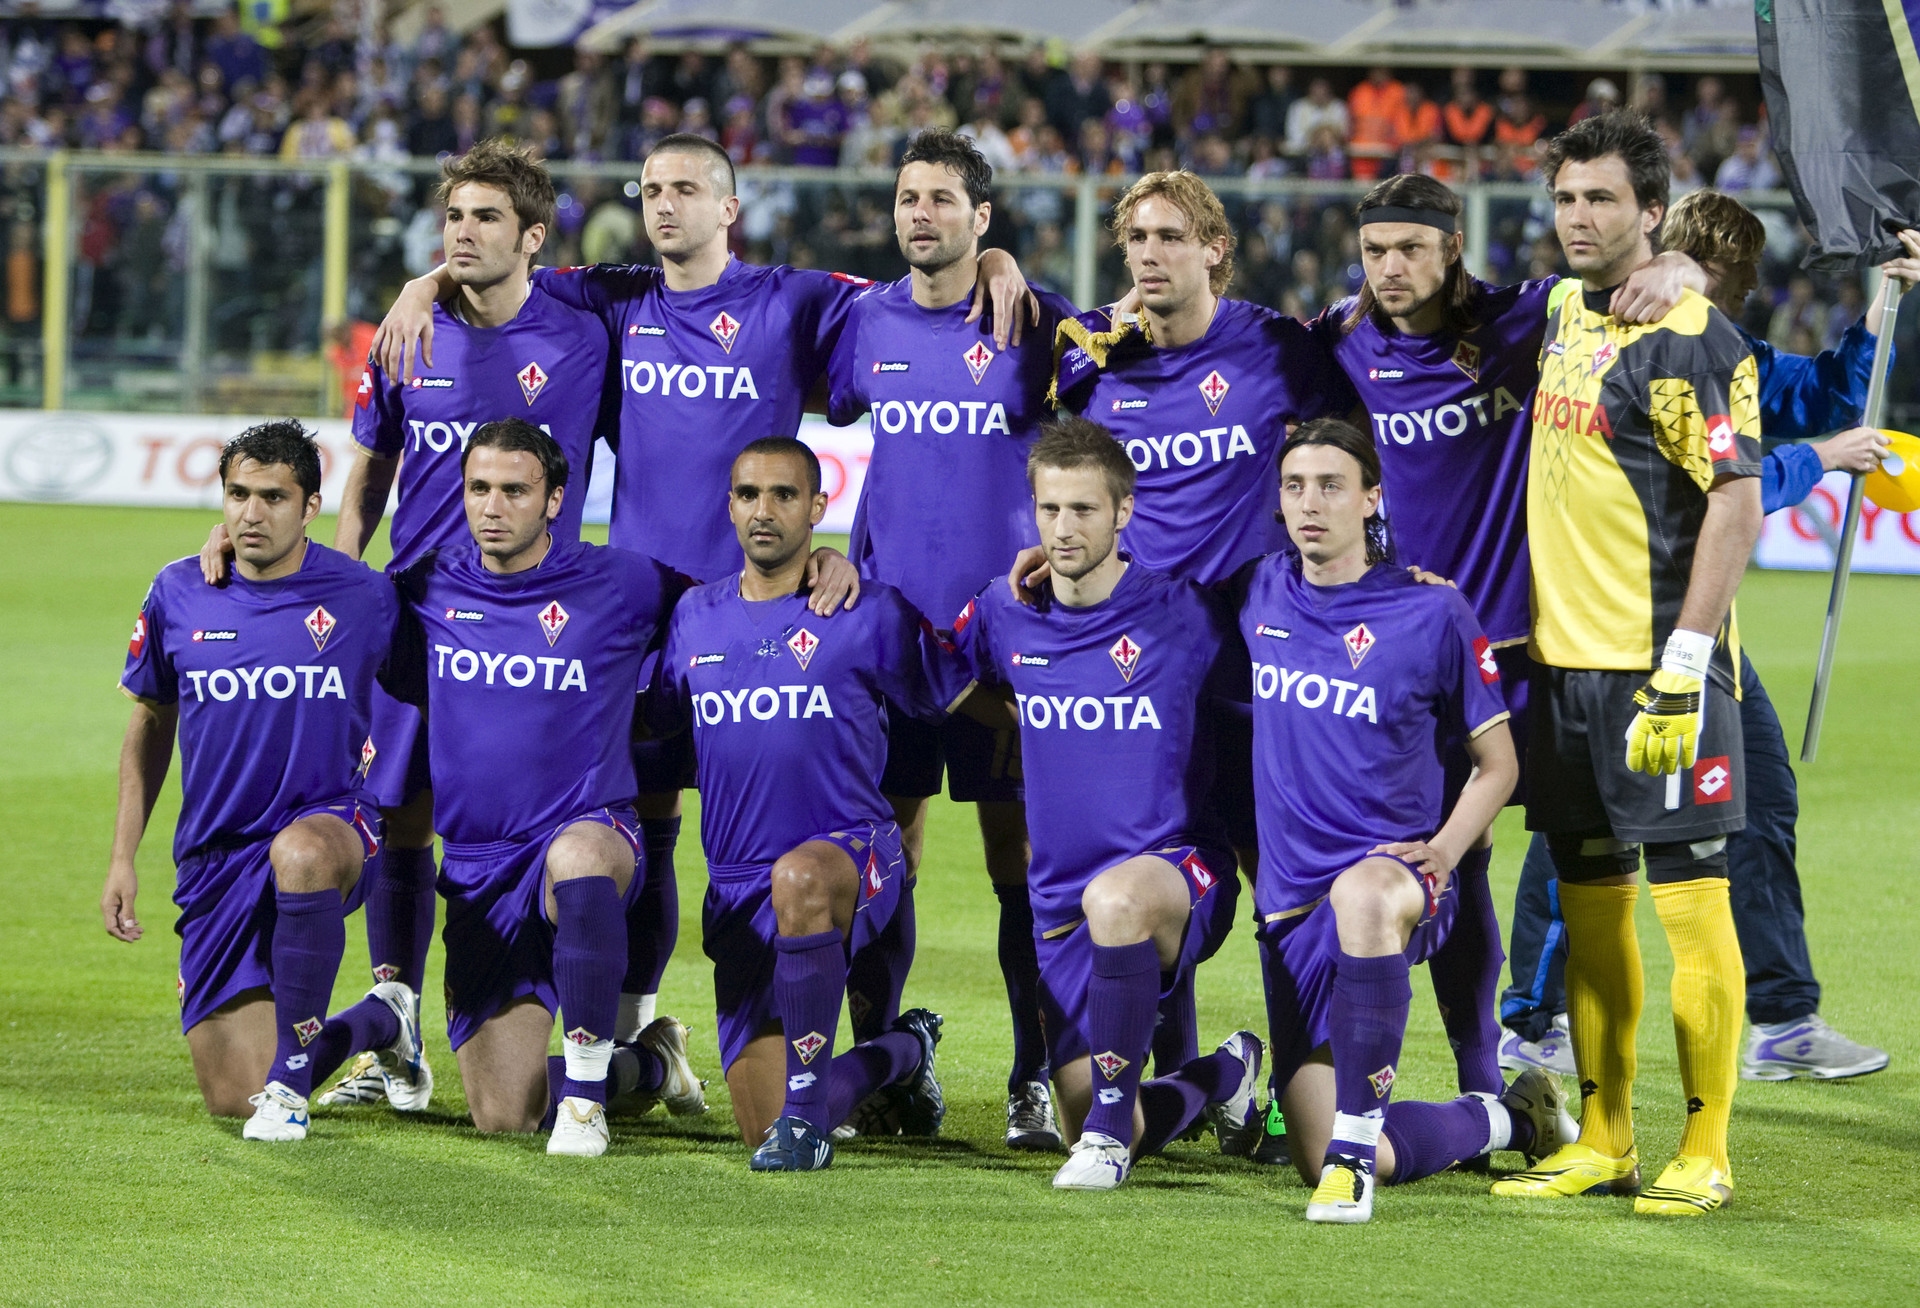 Fiorentina's stars line up before kick-off in Italy.